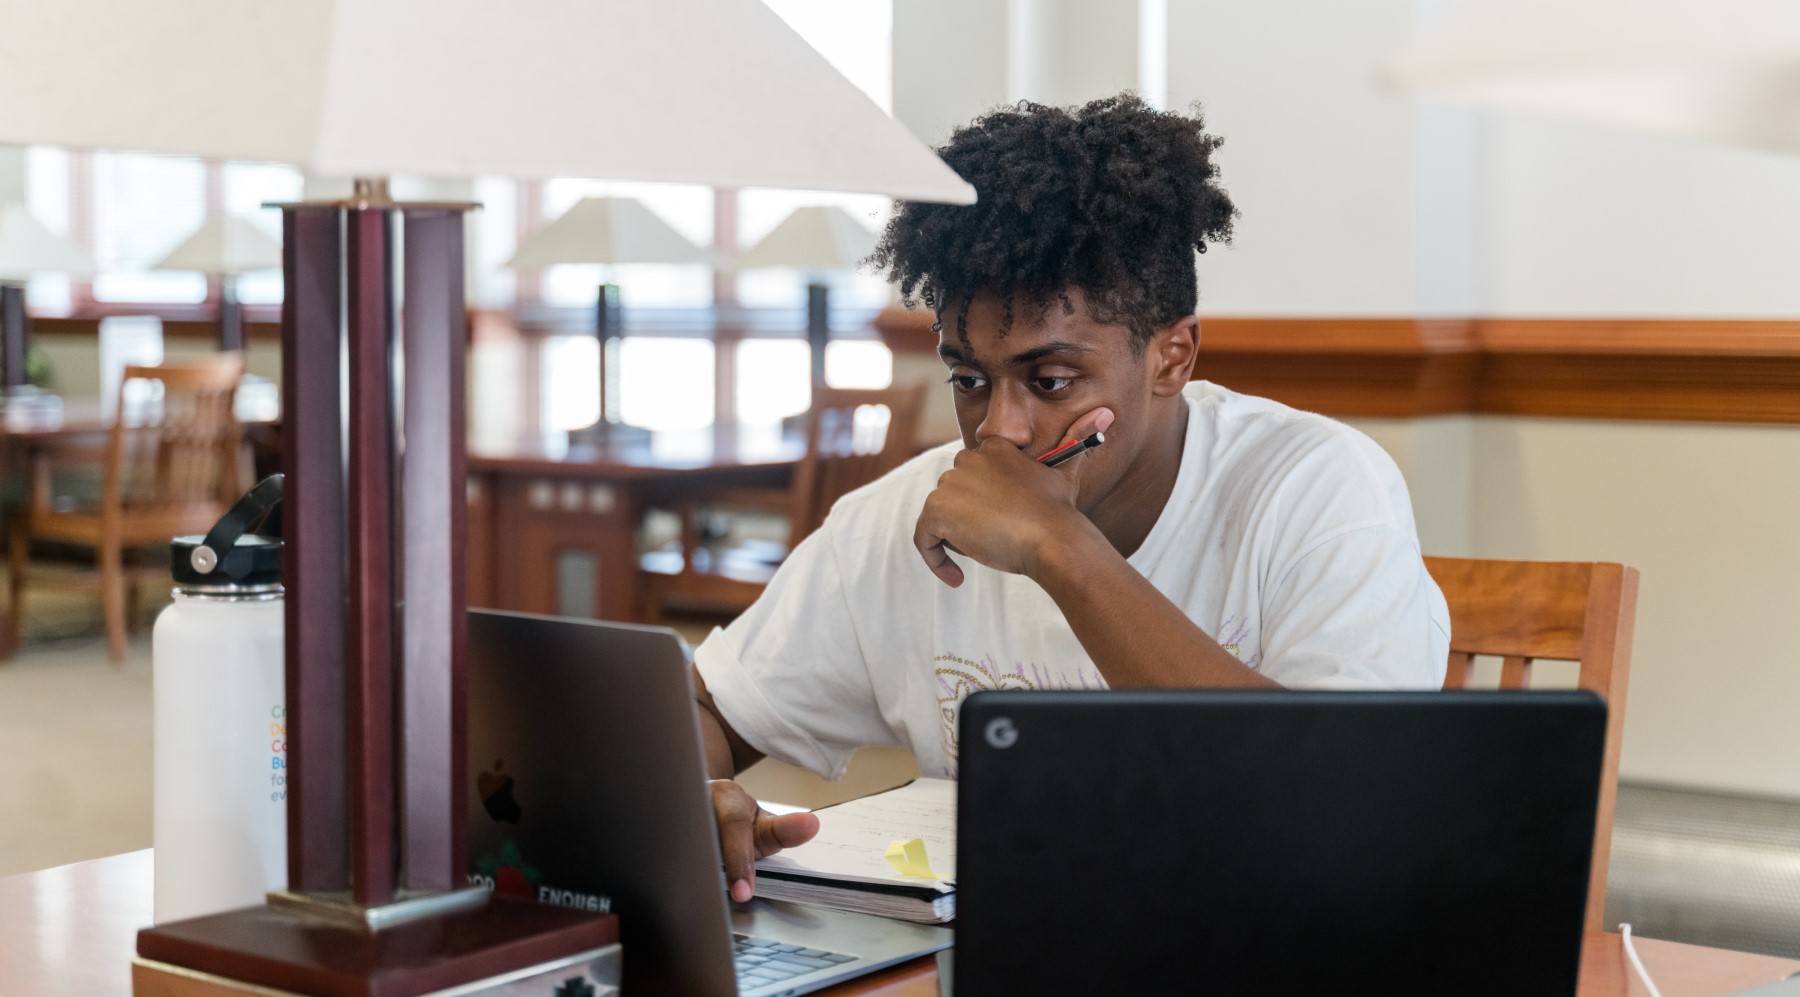 a young man sits at a library desk with two laptops open in front of him and a hand held pensively to his chin